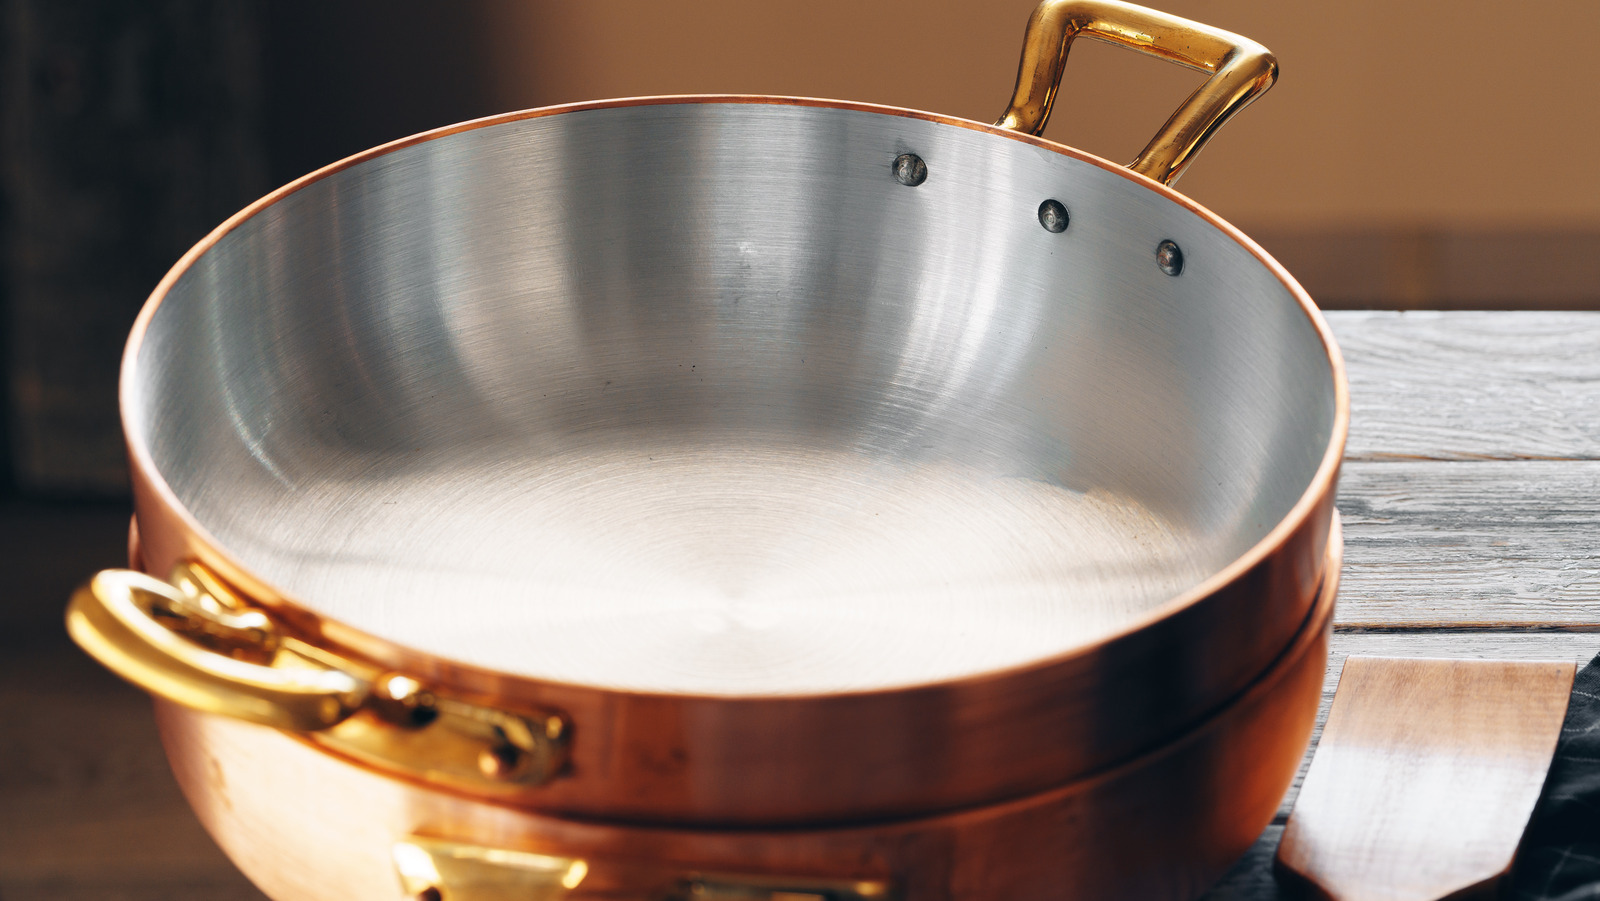 https://www.tastingtable.com/img/gallery/the-downside-of-using-a-copper-pan-lined-with-stainless-steel/l-intro-1682600449.jpg